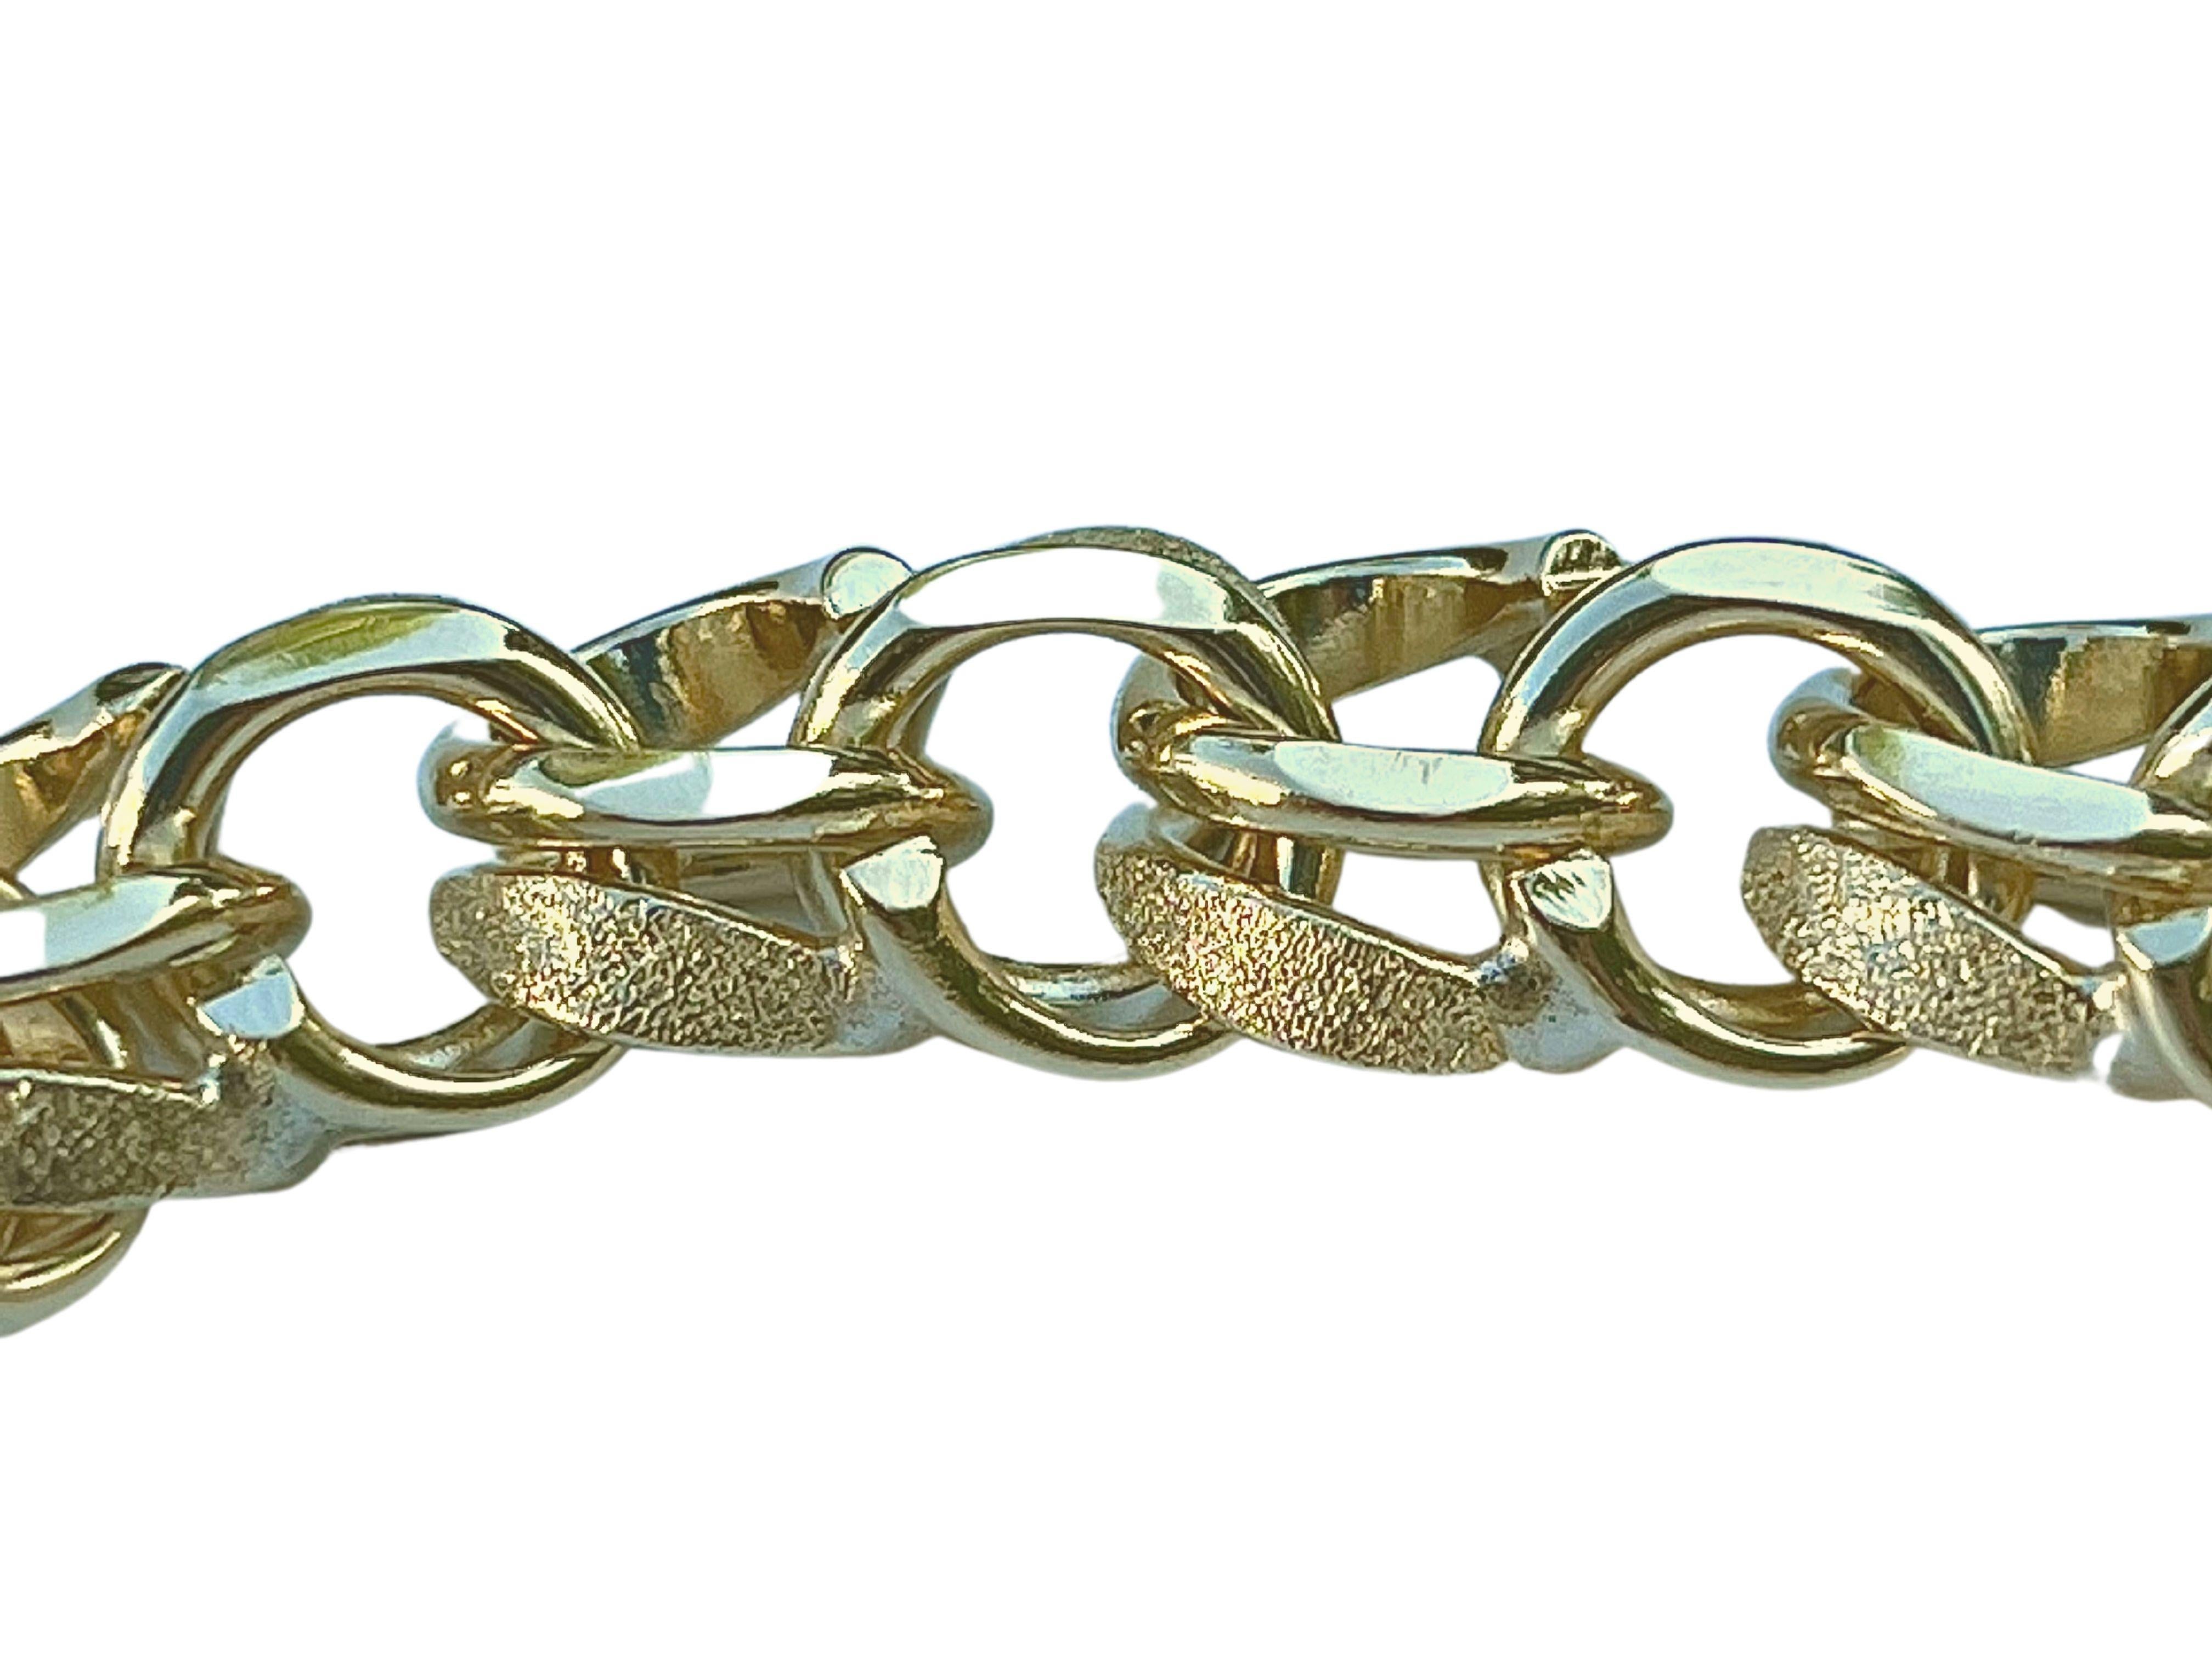 14k solid gold double cable chain link bracelet with box and clip closure. This bracelet is made up of smooth, diamond cut, cable links, and textured circular links of a slightly larger size. This intricate combination of circular links creates a